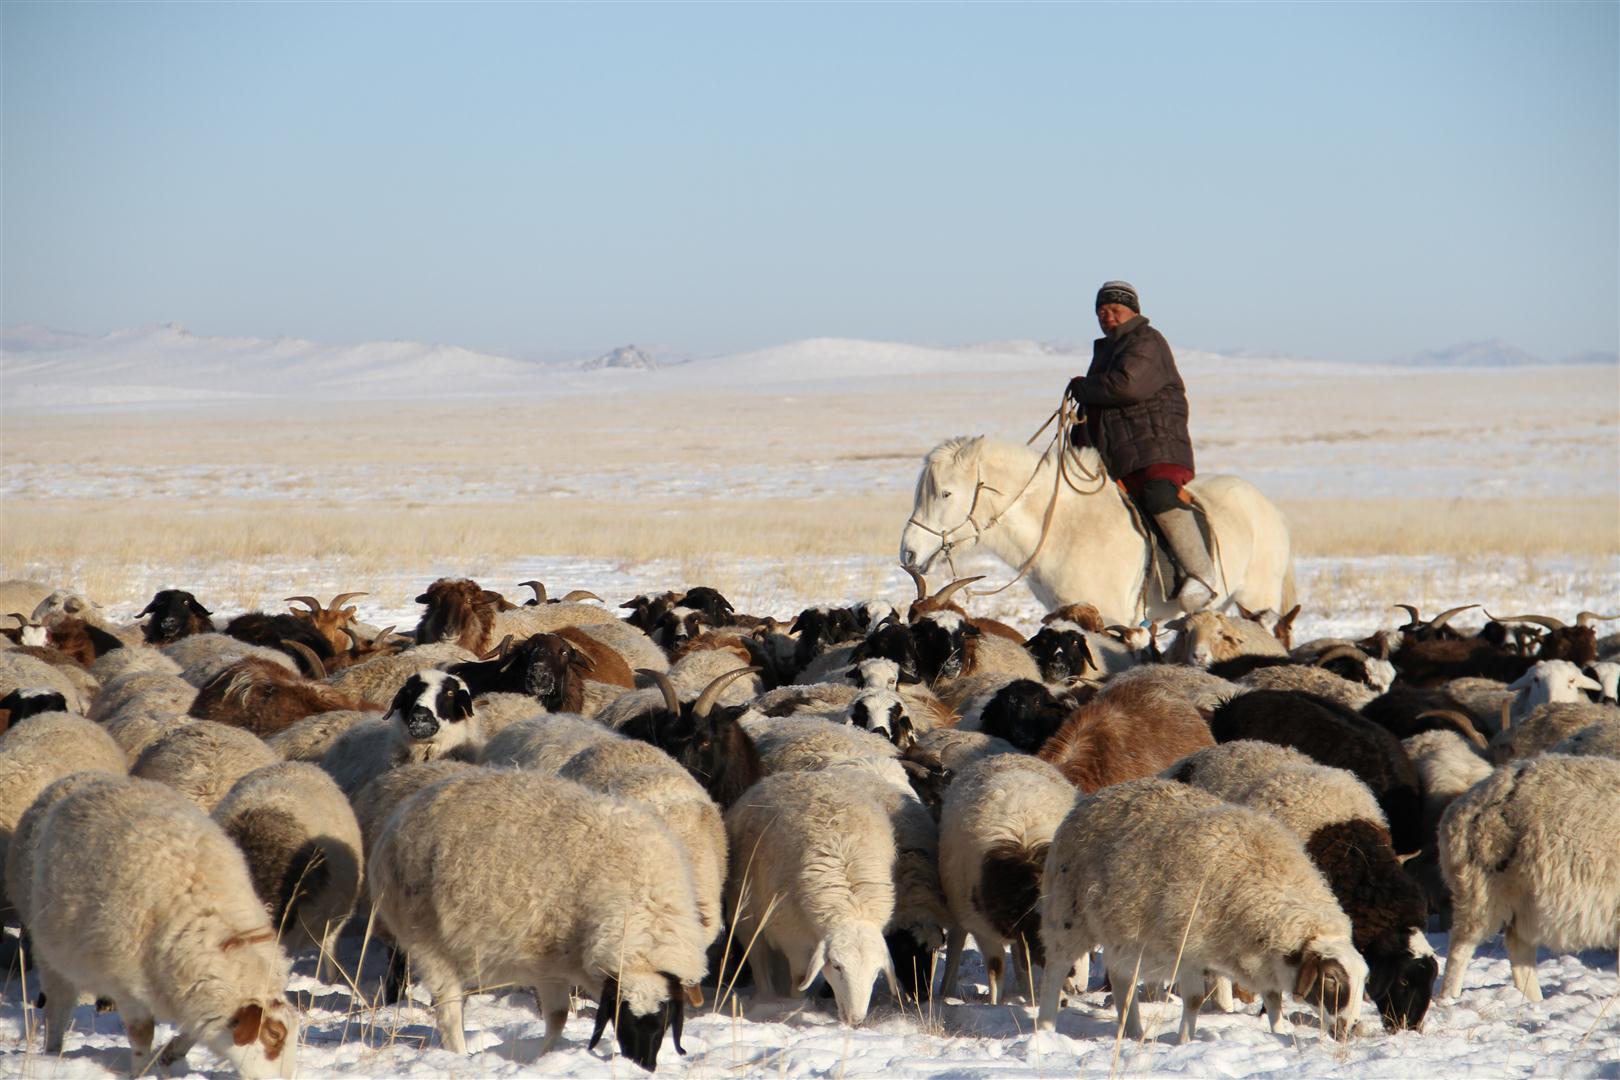 Mounted Mongolian herdsman leading his flock of sheep through snow-covered plains.